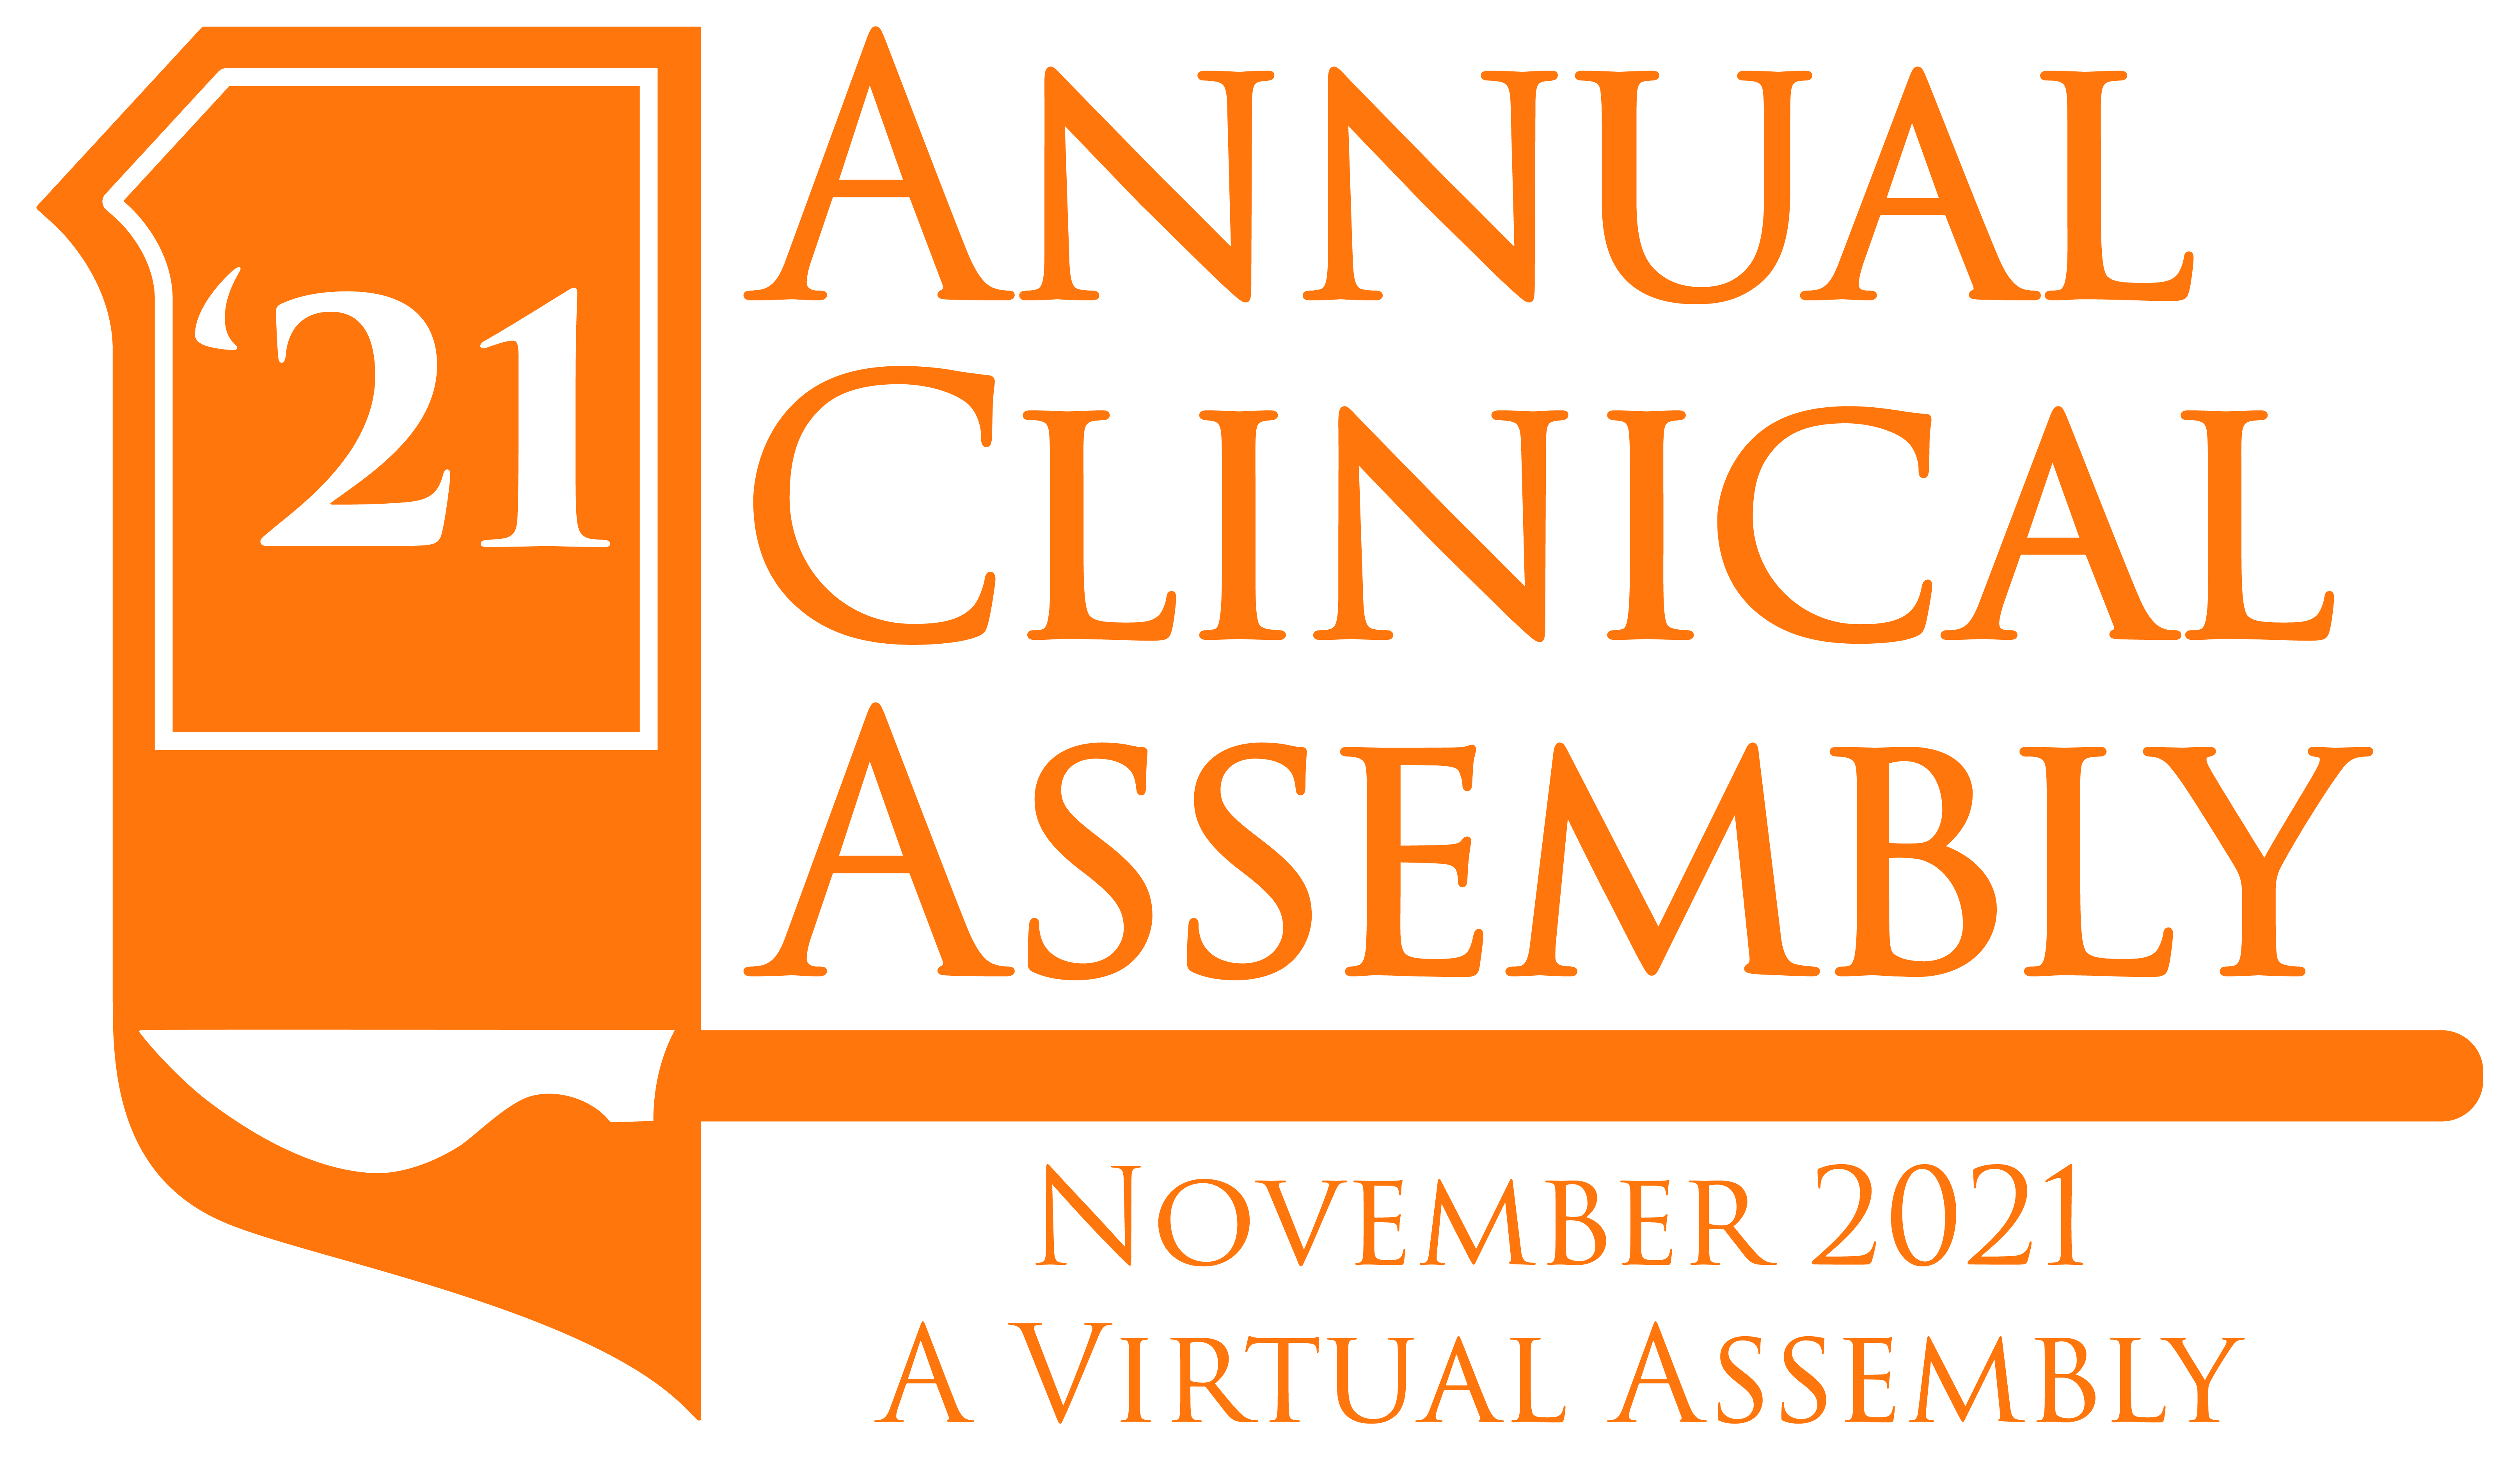 2021 Annual Clinical Assembly